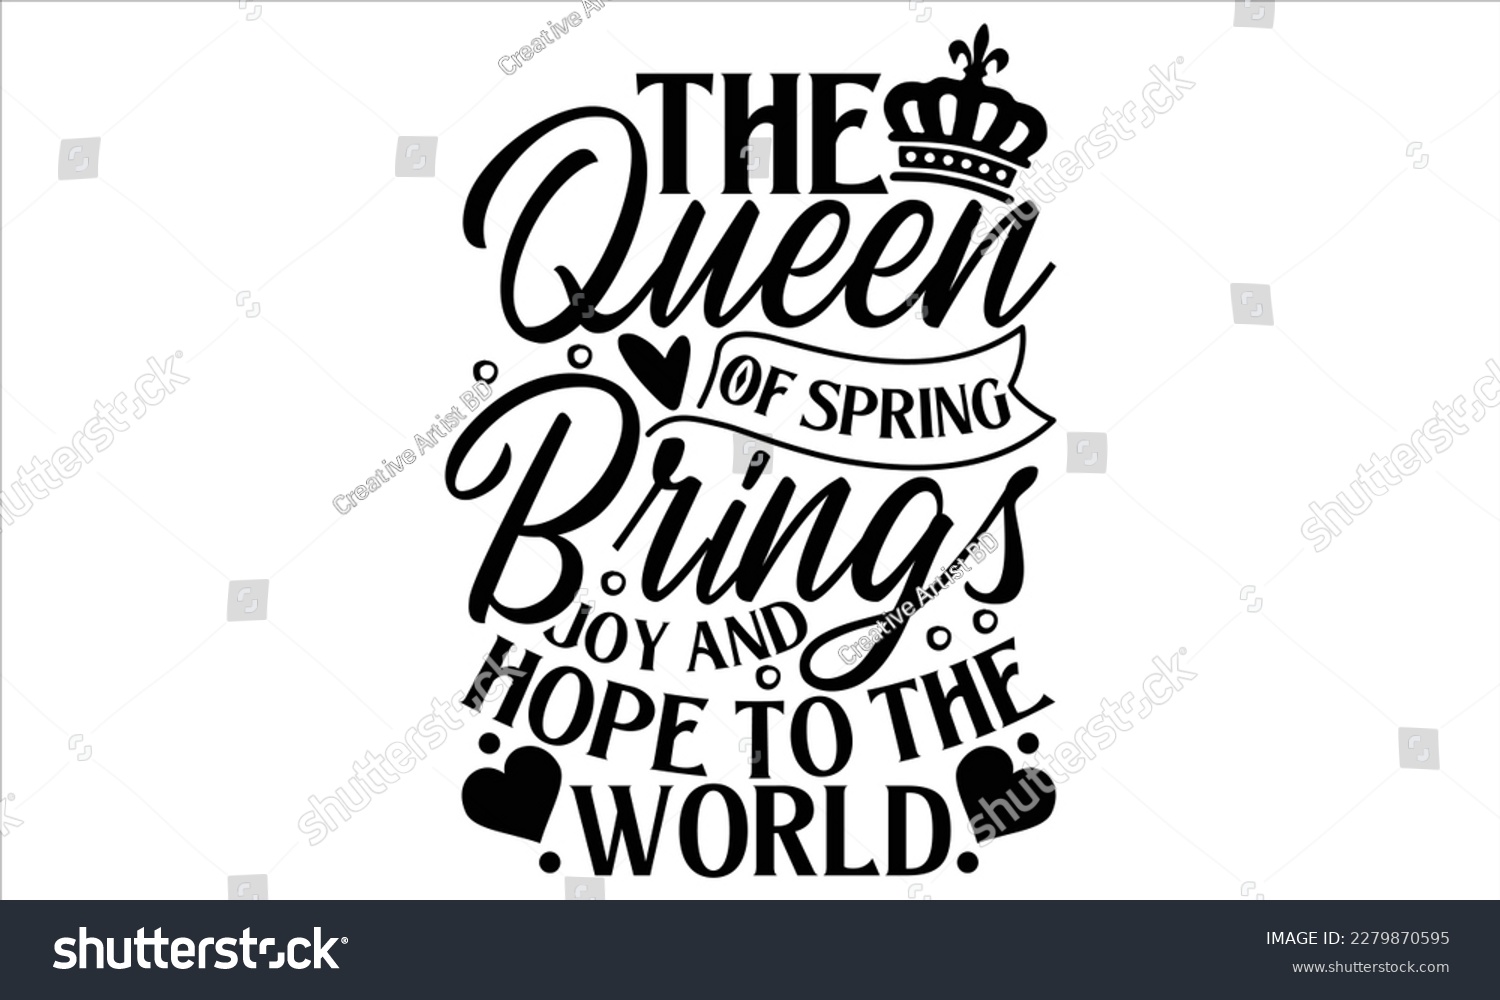 SVG of The Queen Of Spring Brings Joy And Hope To The World - Victoria Day T Shirt Design, Vintage style, used for poster svg cut file, svg file, poster, banner, flyer and mug. svg